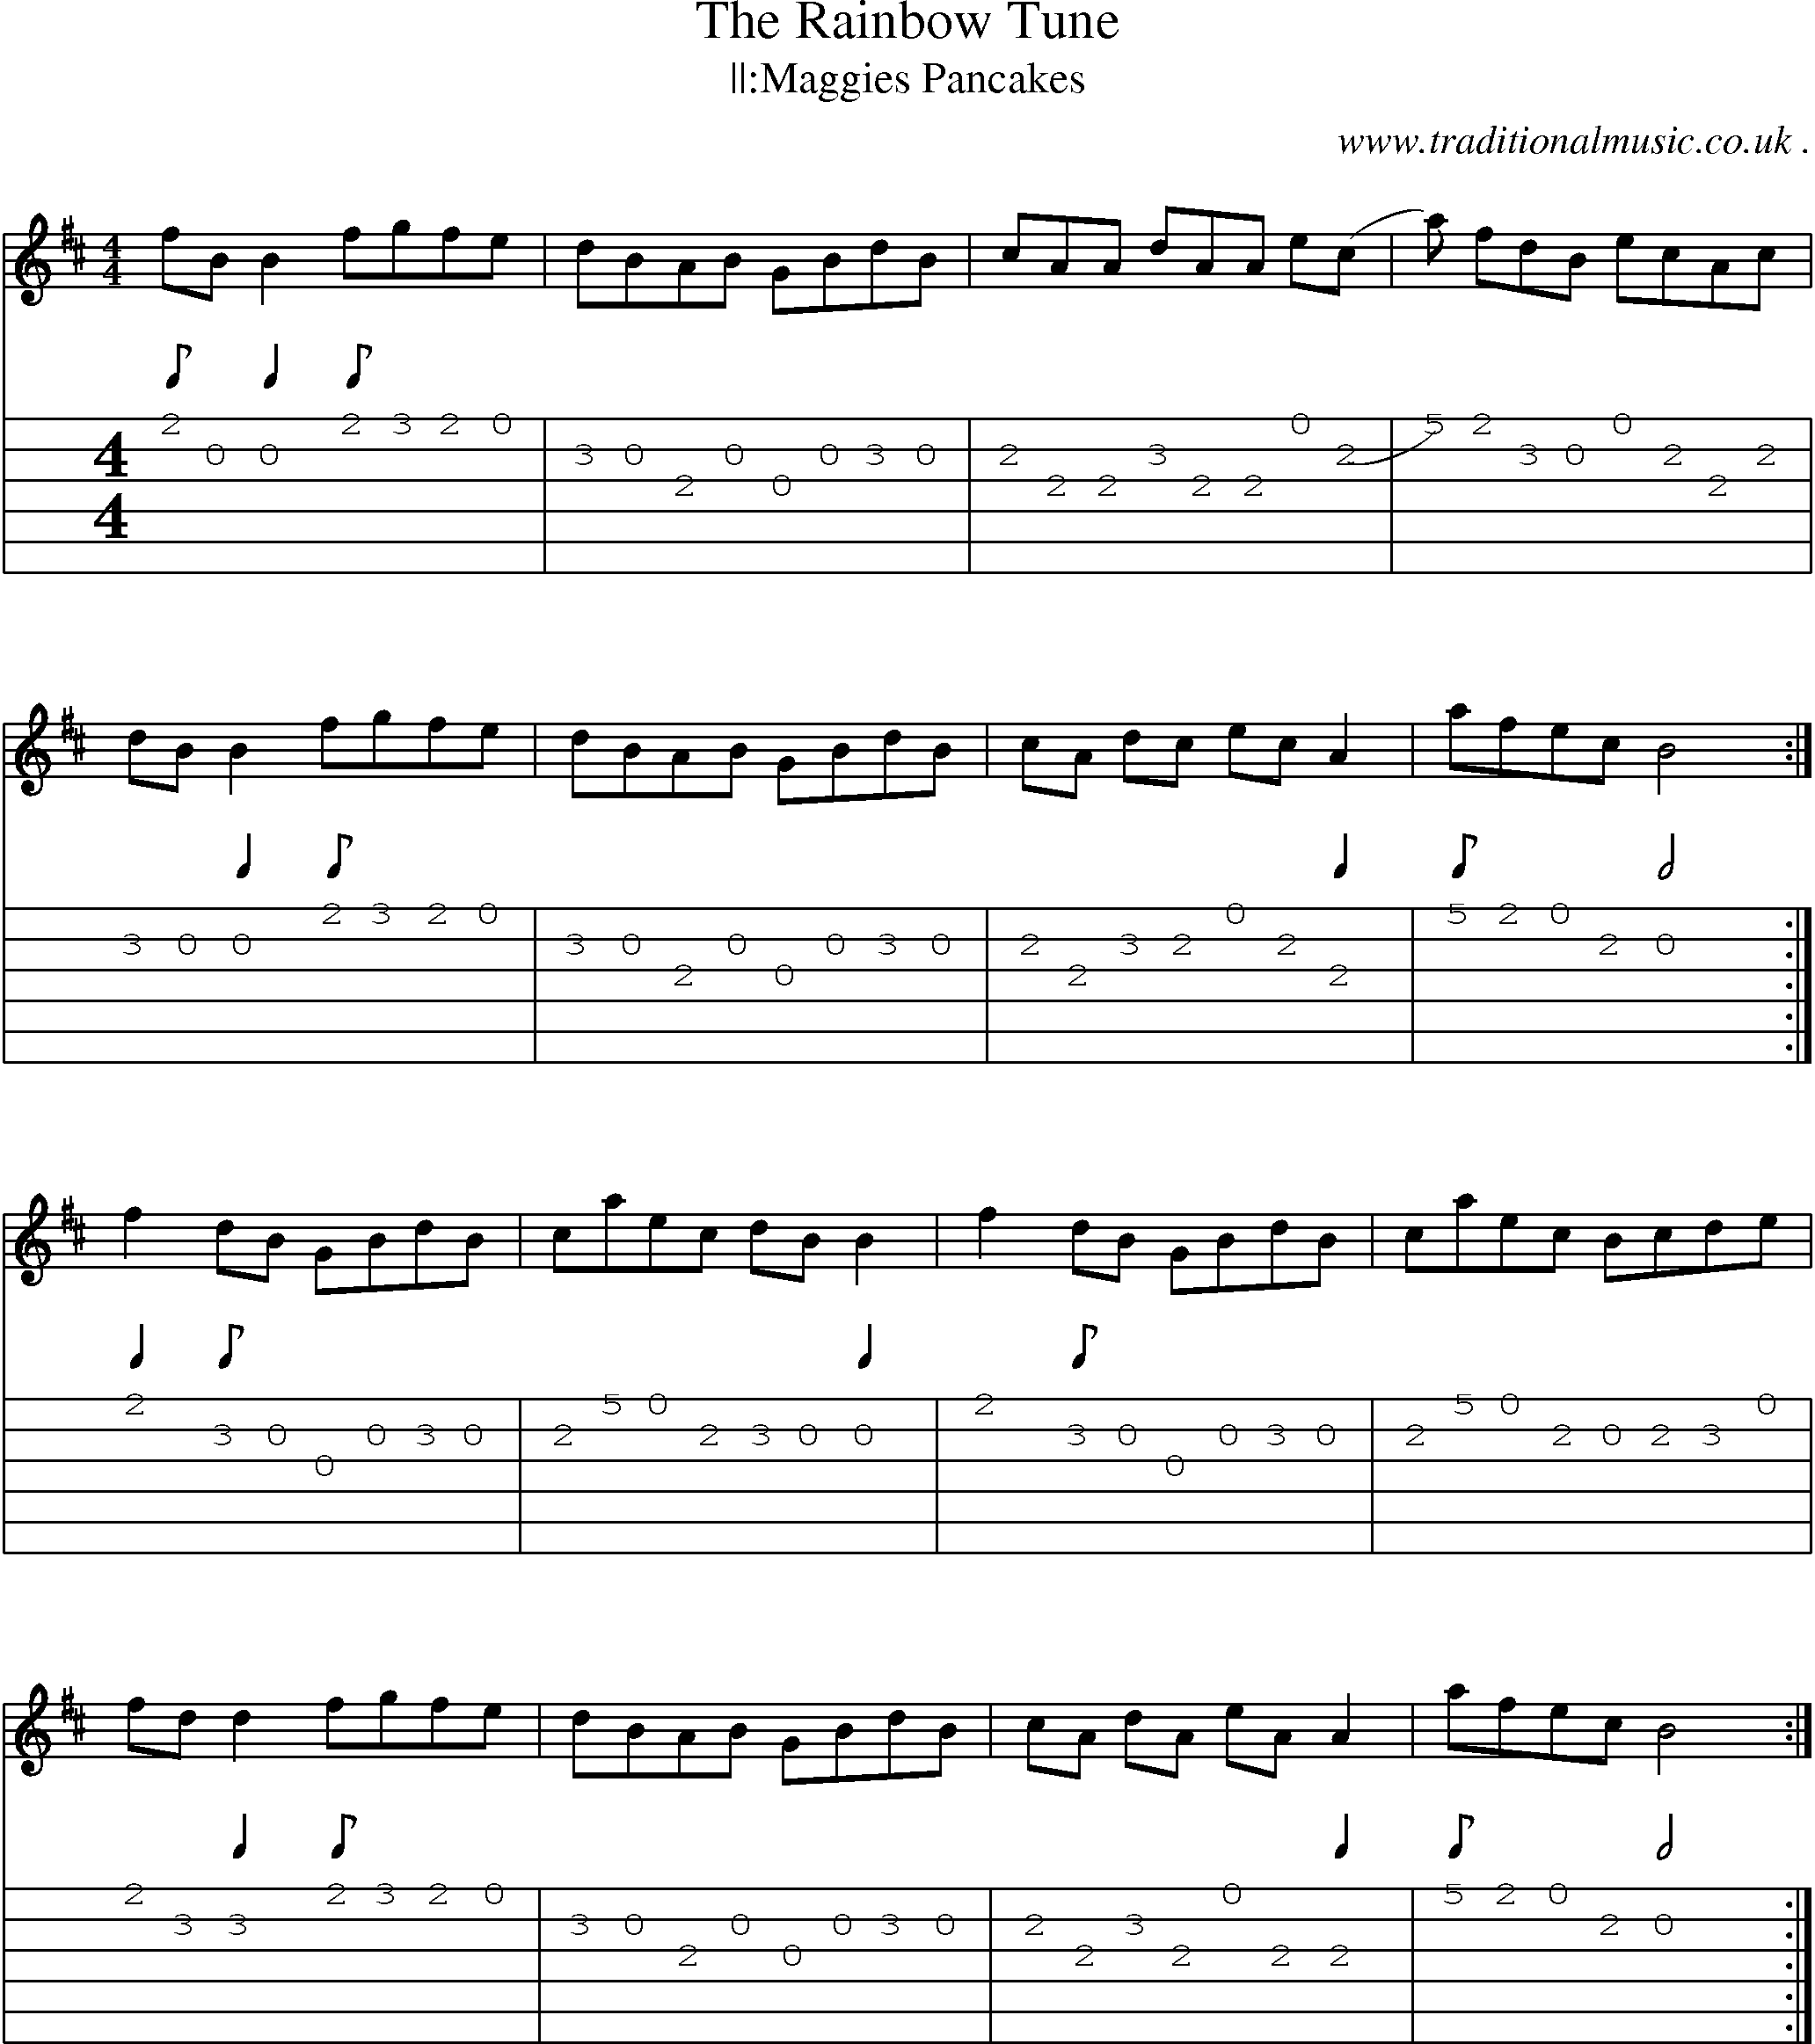 Sheet-Music and Guitar Tabs for The Rainbow Tune